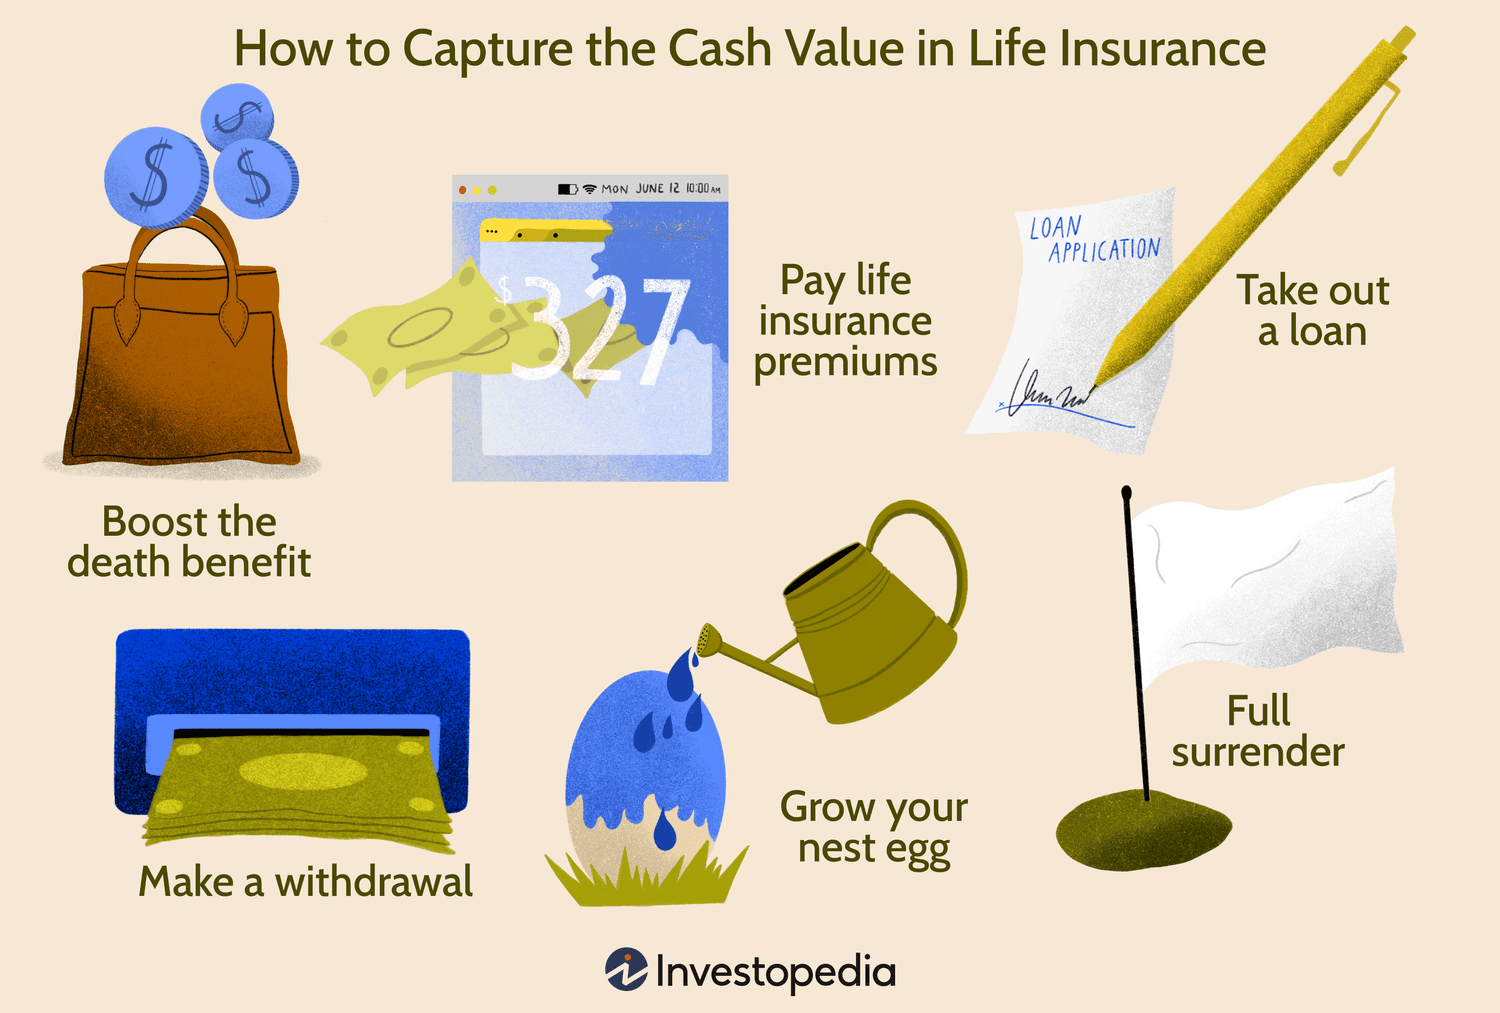 image of ways on how to capture the cash value in life insurance